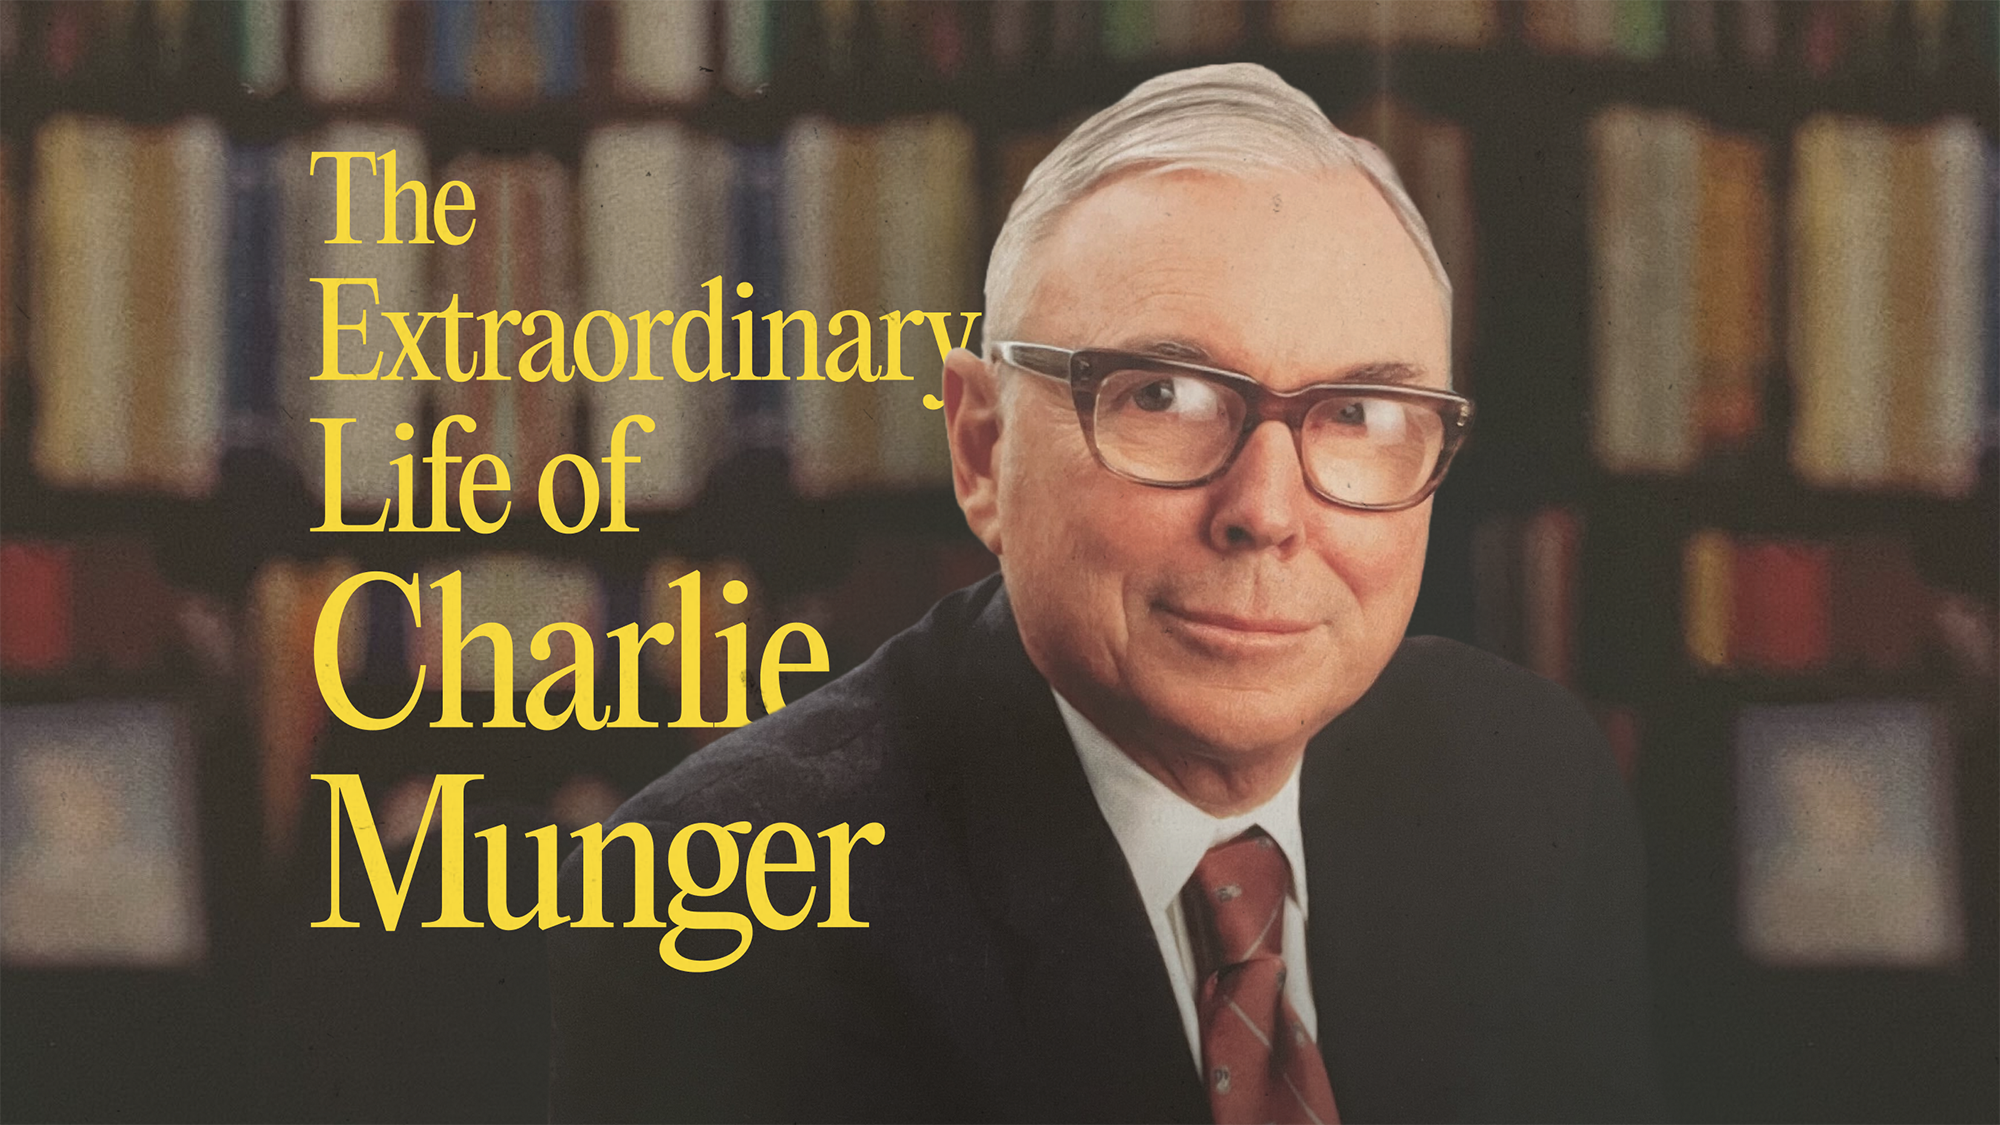 The Extraordinary Life of Charlie Munger